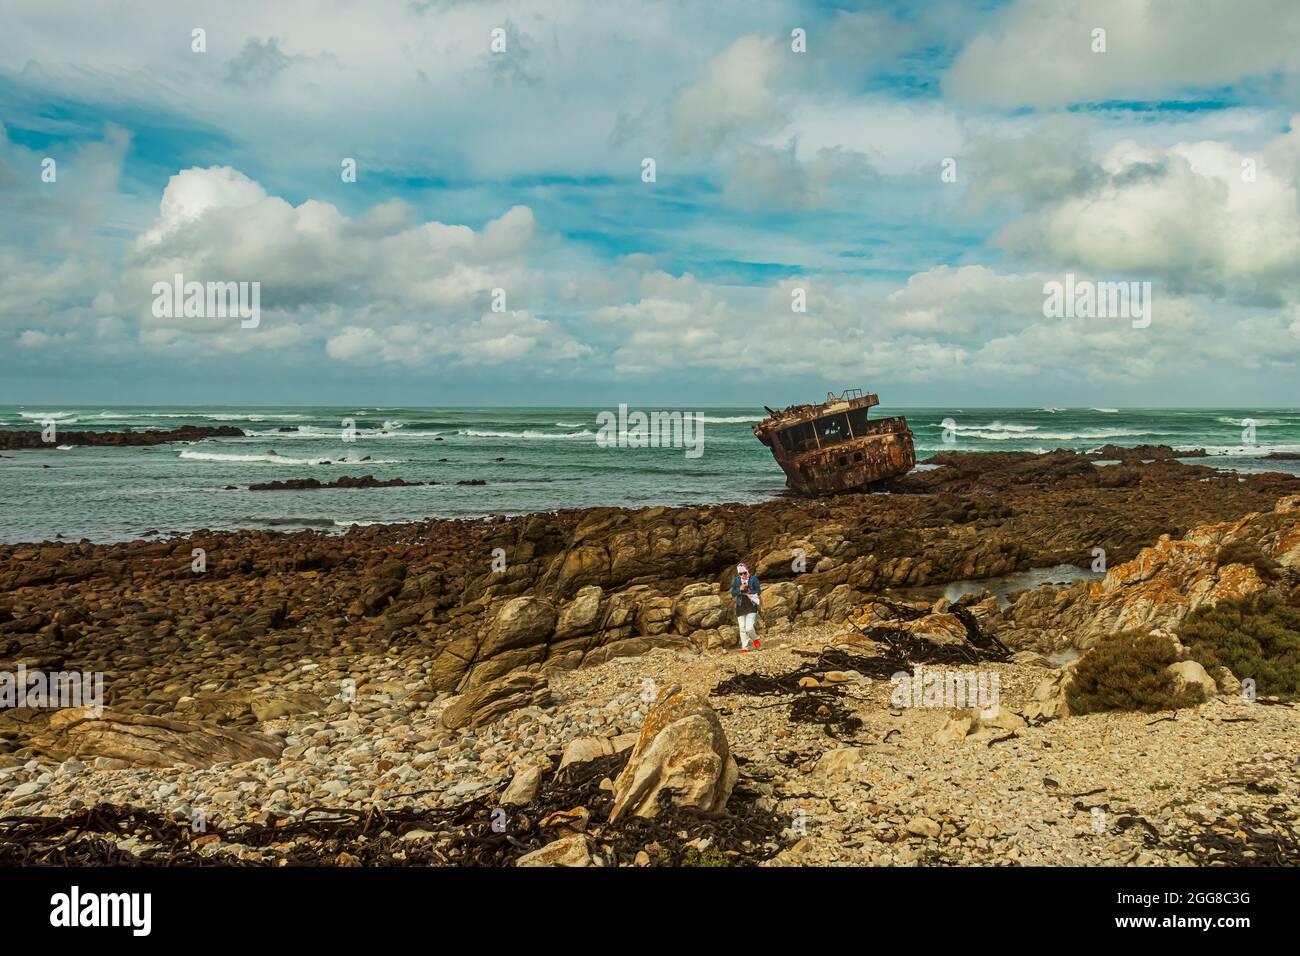 Rugged rocky shore with rusted shipwreck of Meisho Maru No.38 at Cape Agulhas in South Africa which is the southernmost point of African Continent. Stock Photo